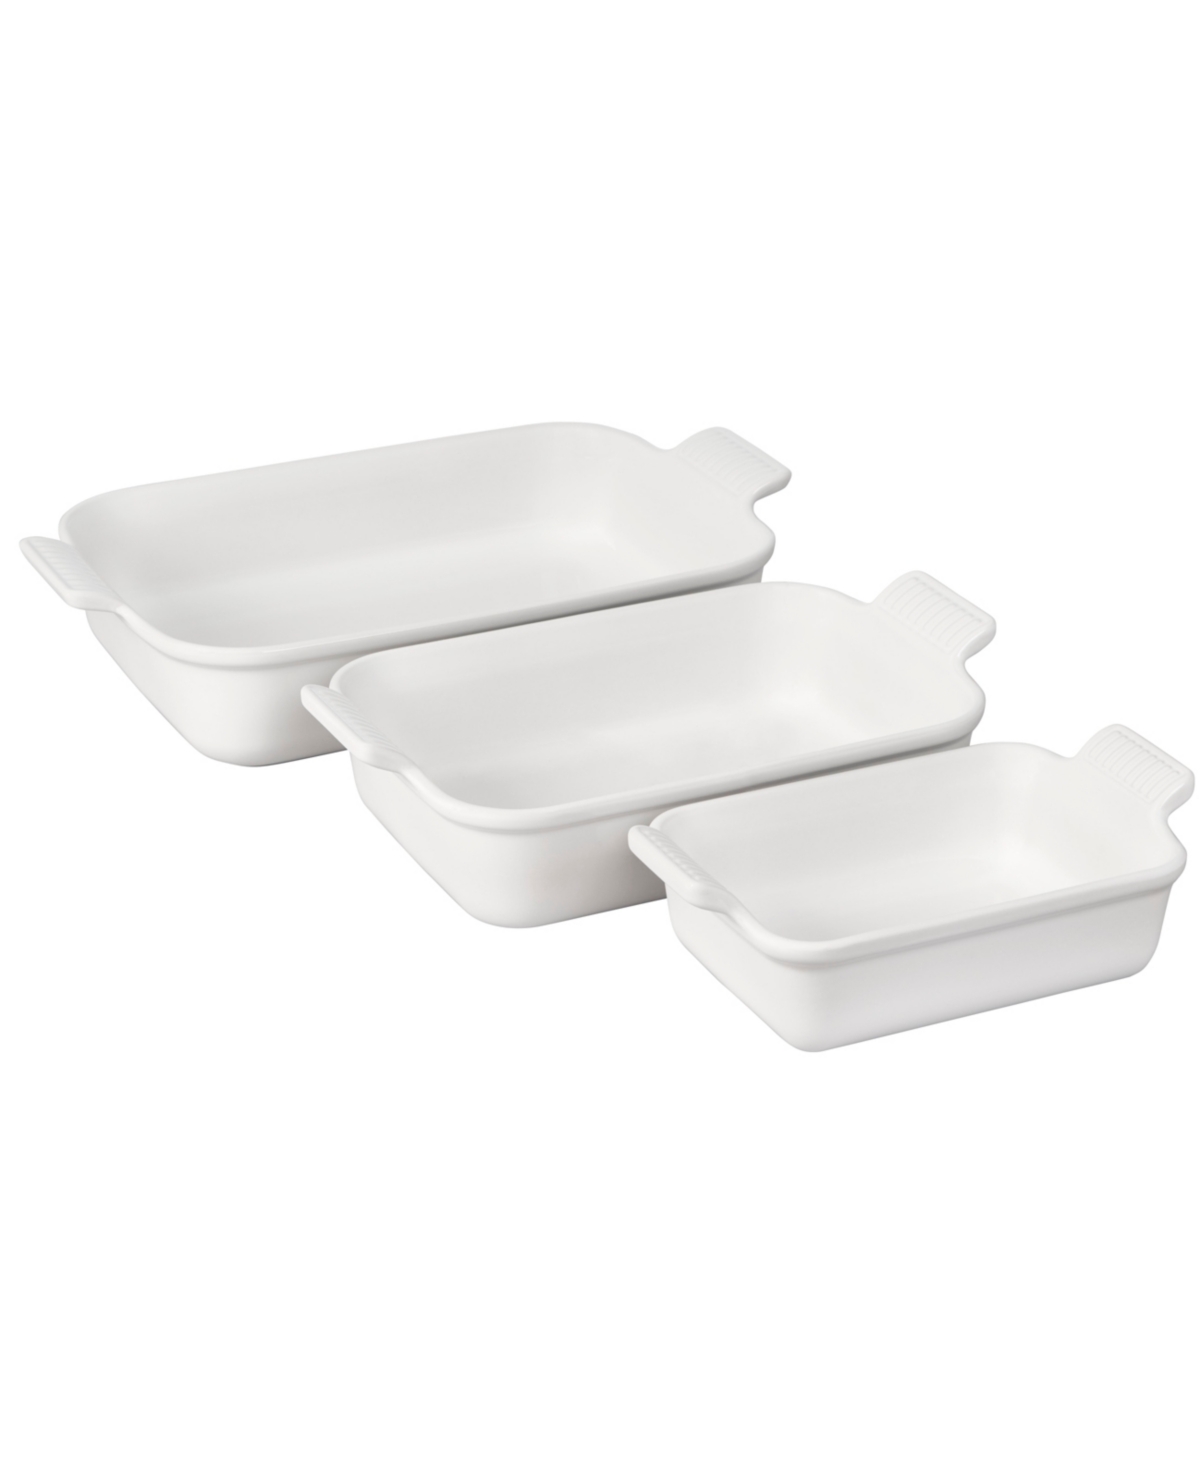 Le Creuset Set Of 3 Heritage Bakers In White